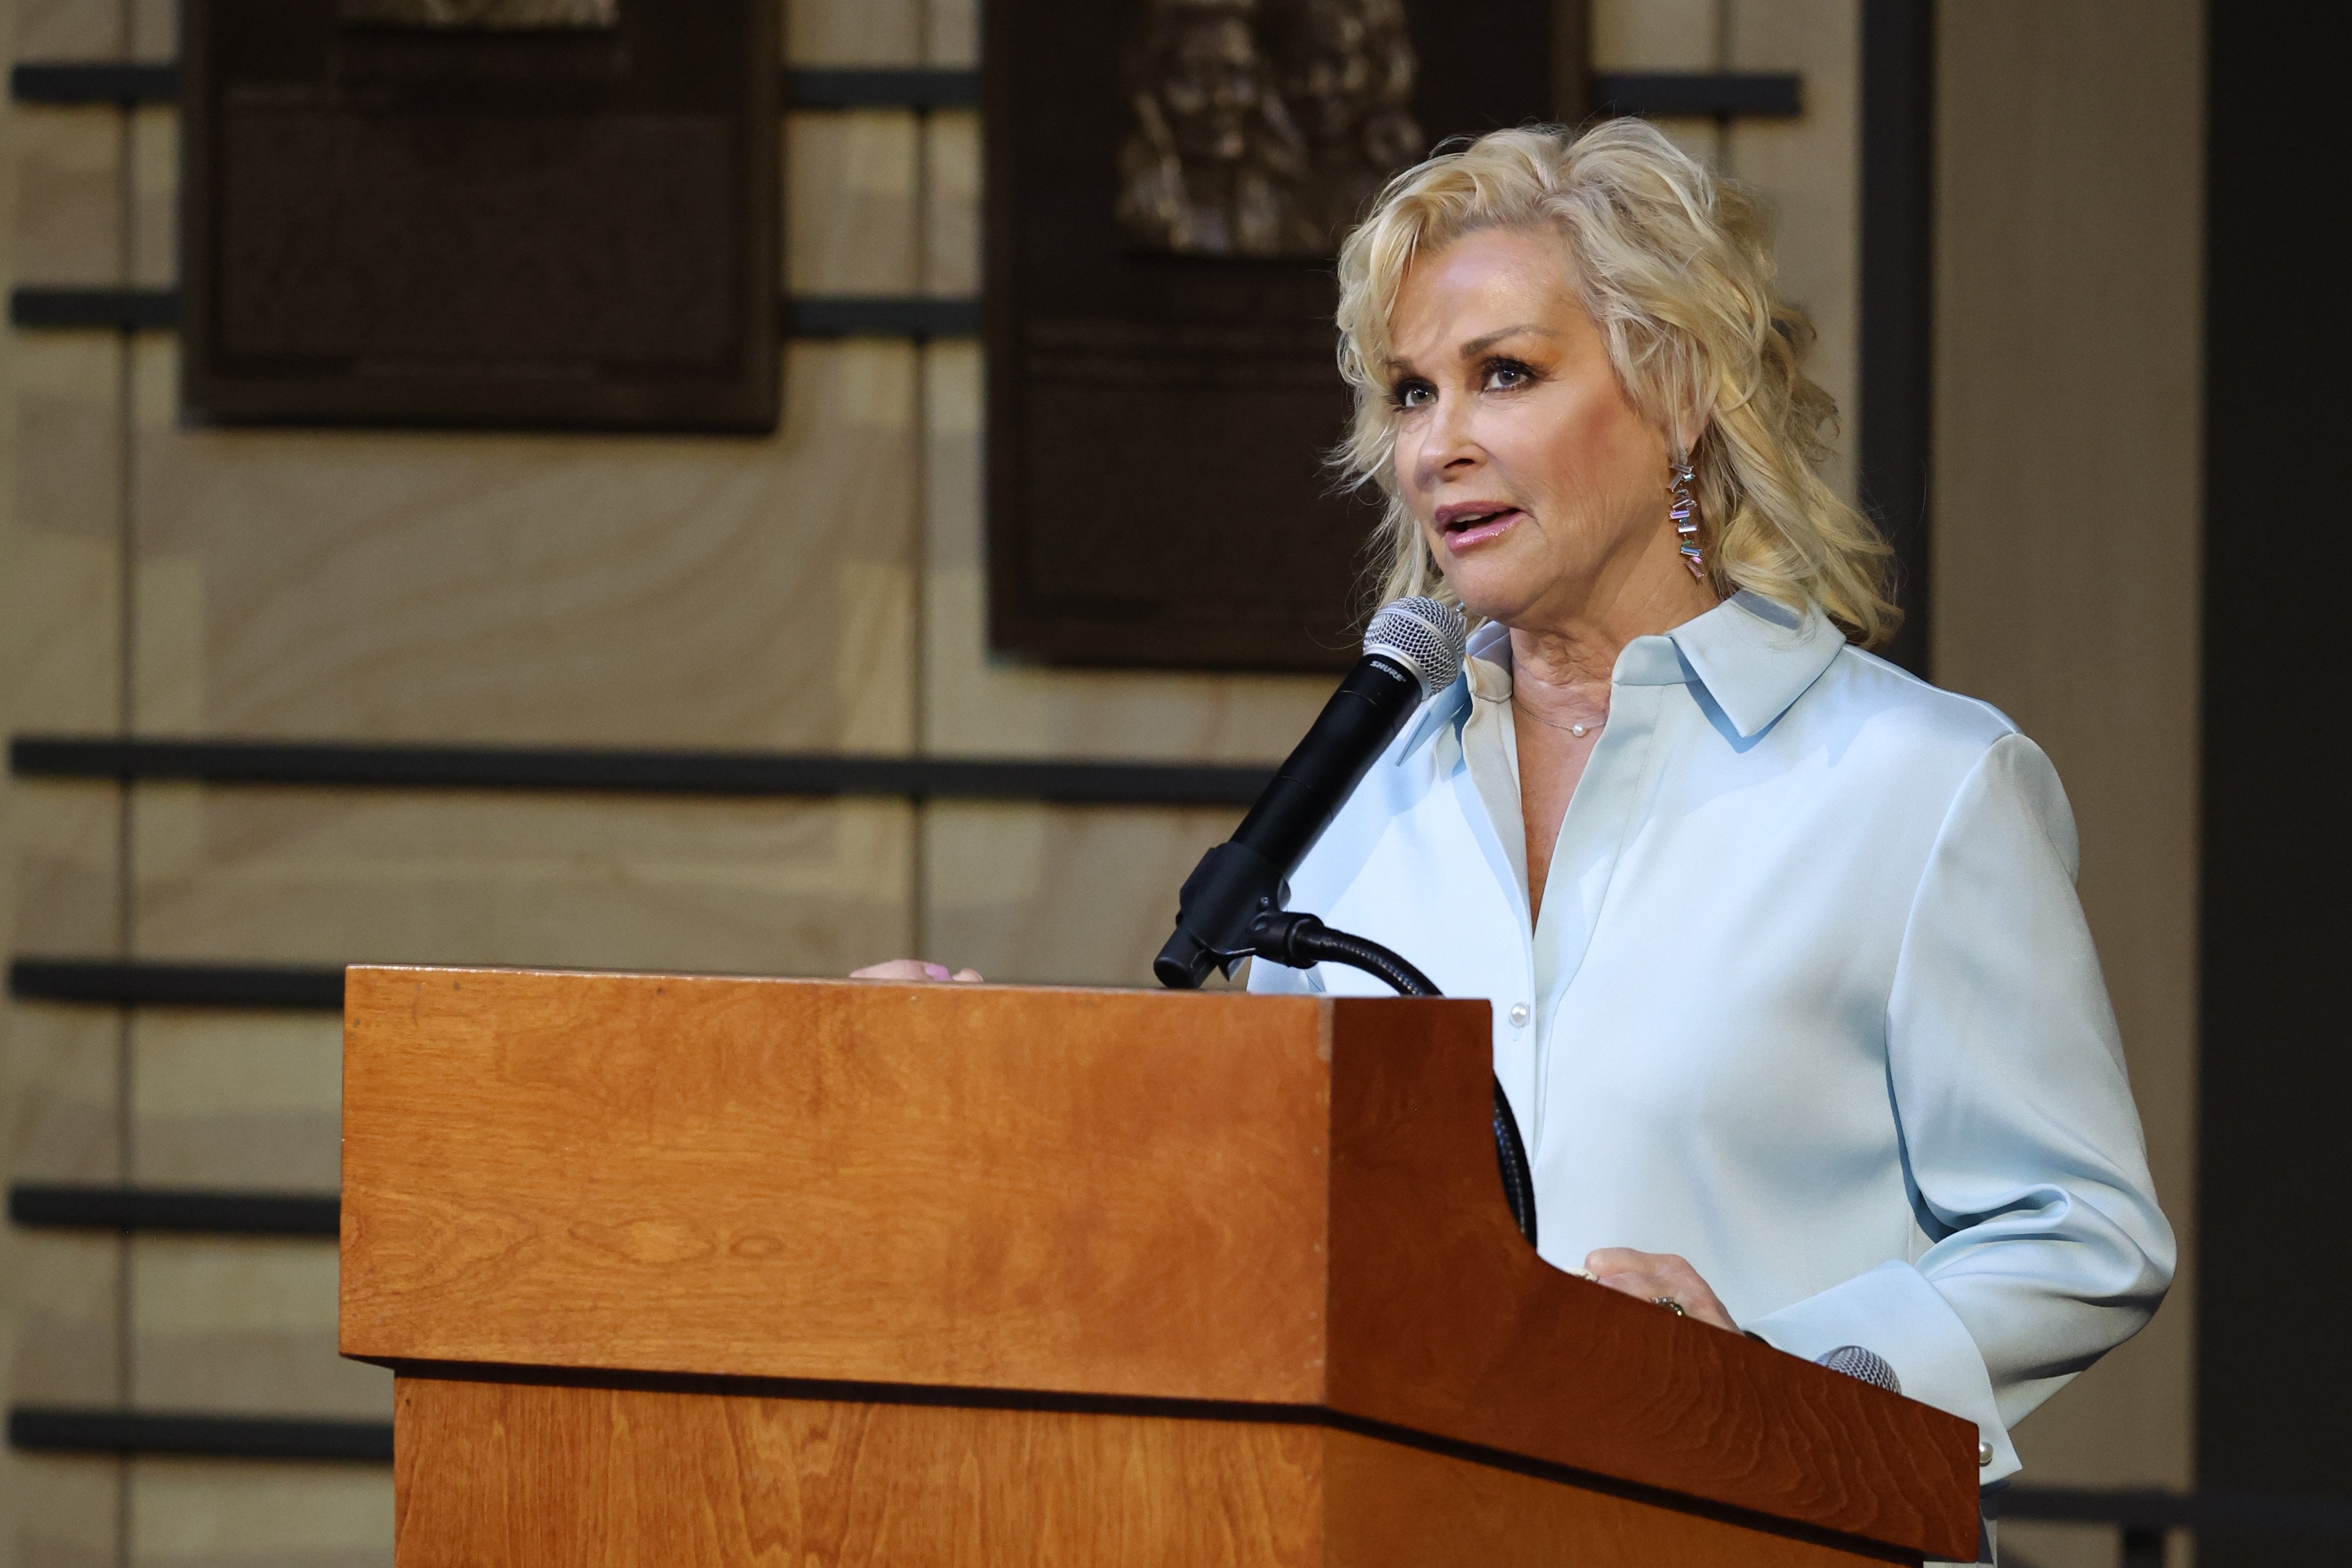 Lorrie Morgan speaks at the Country Music Hall of Fame 2022 inductees presented by CMA on May 17, 2022 in Nashville, Tennessee. | Source: Getty Images